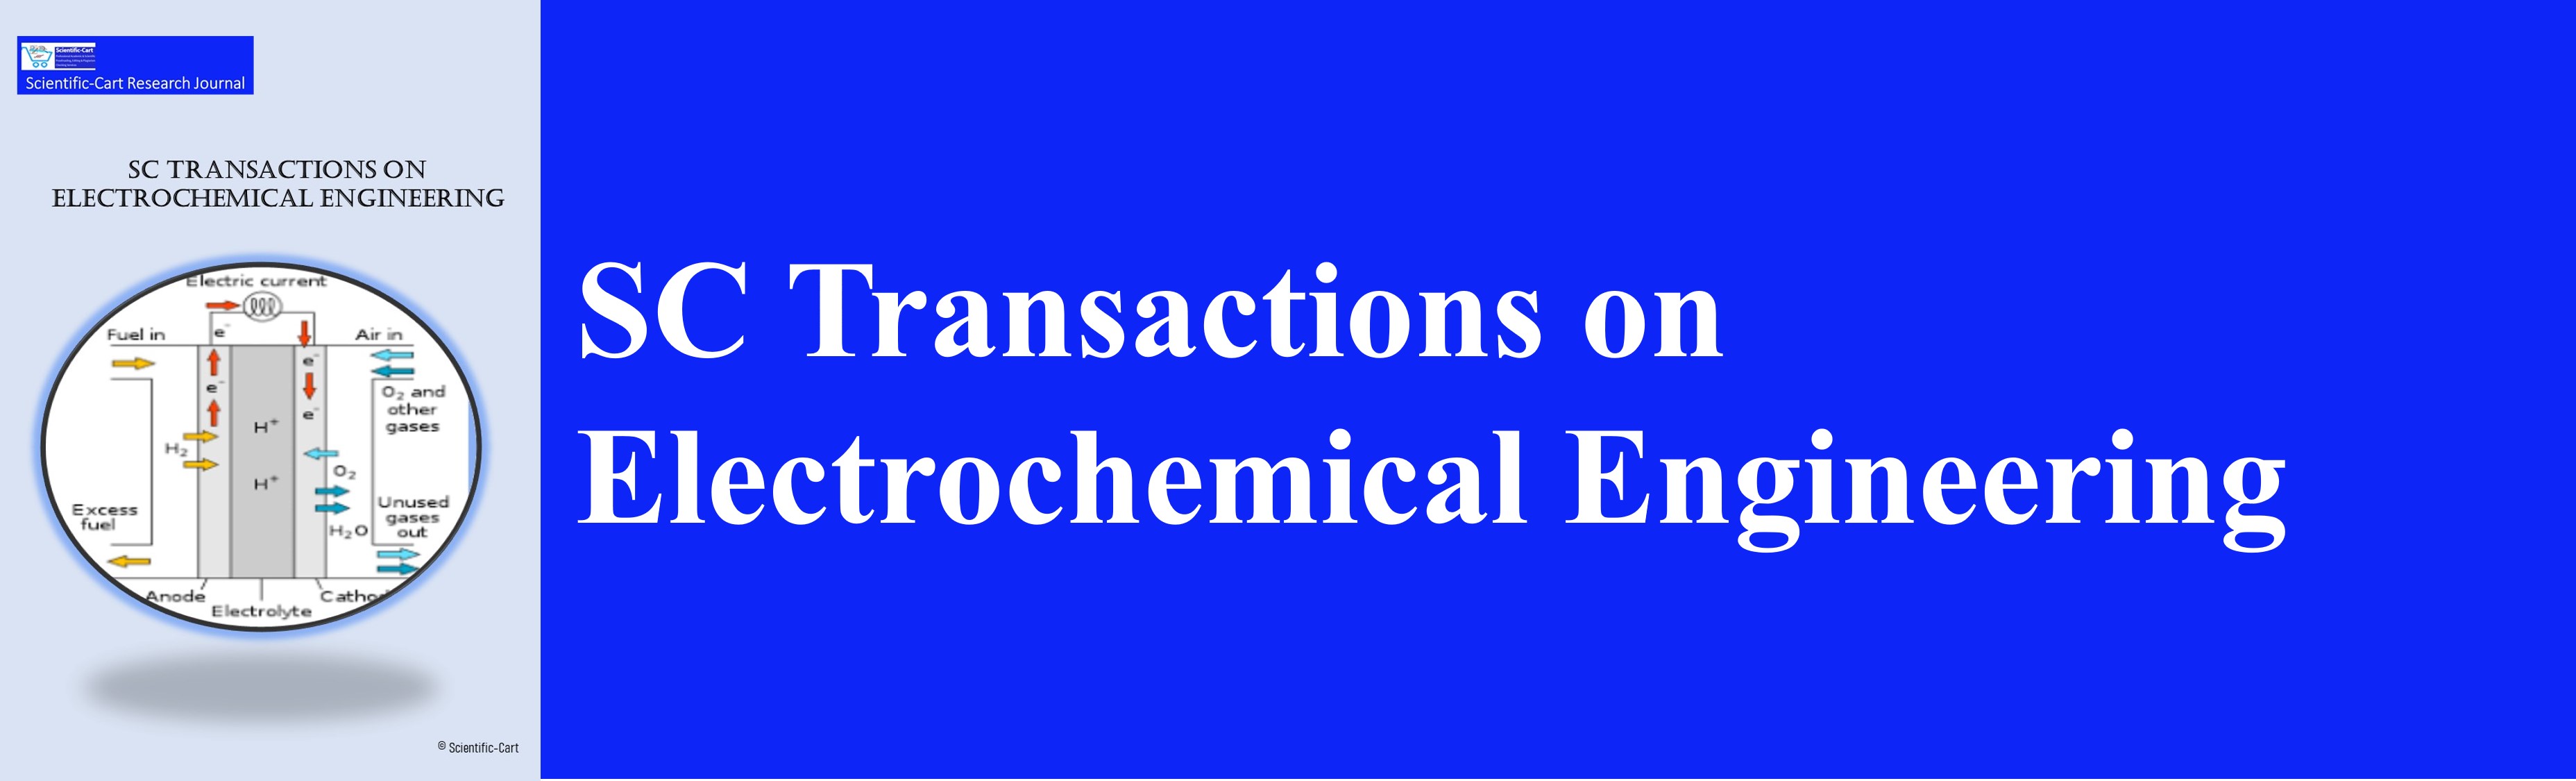 SC Transactions on Electrochemical Engineering